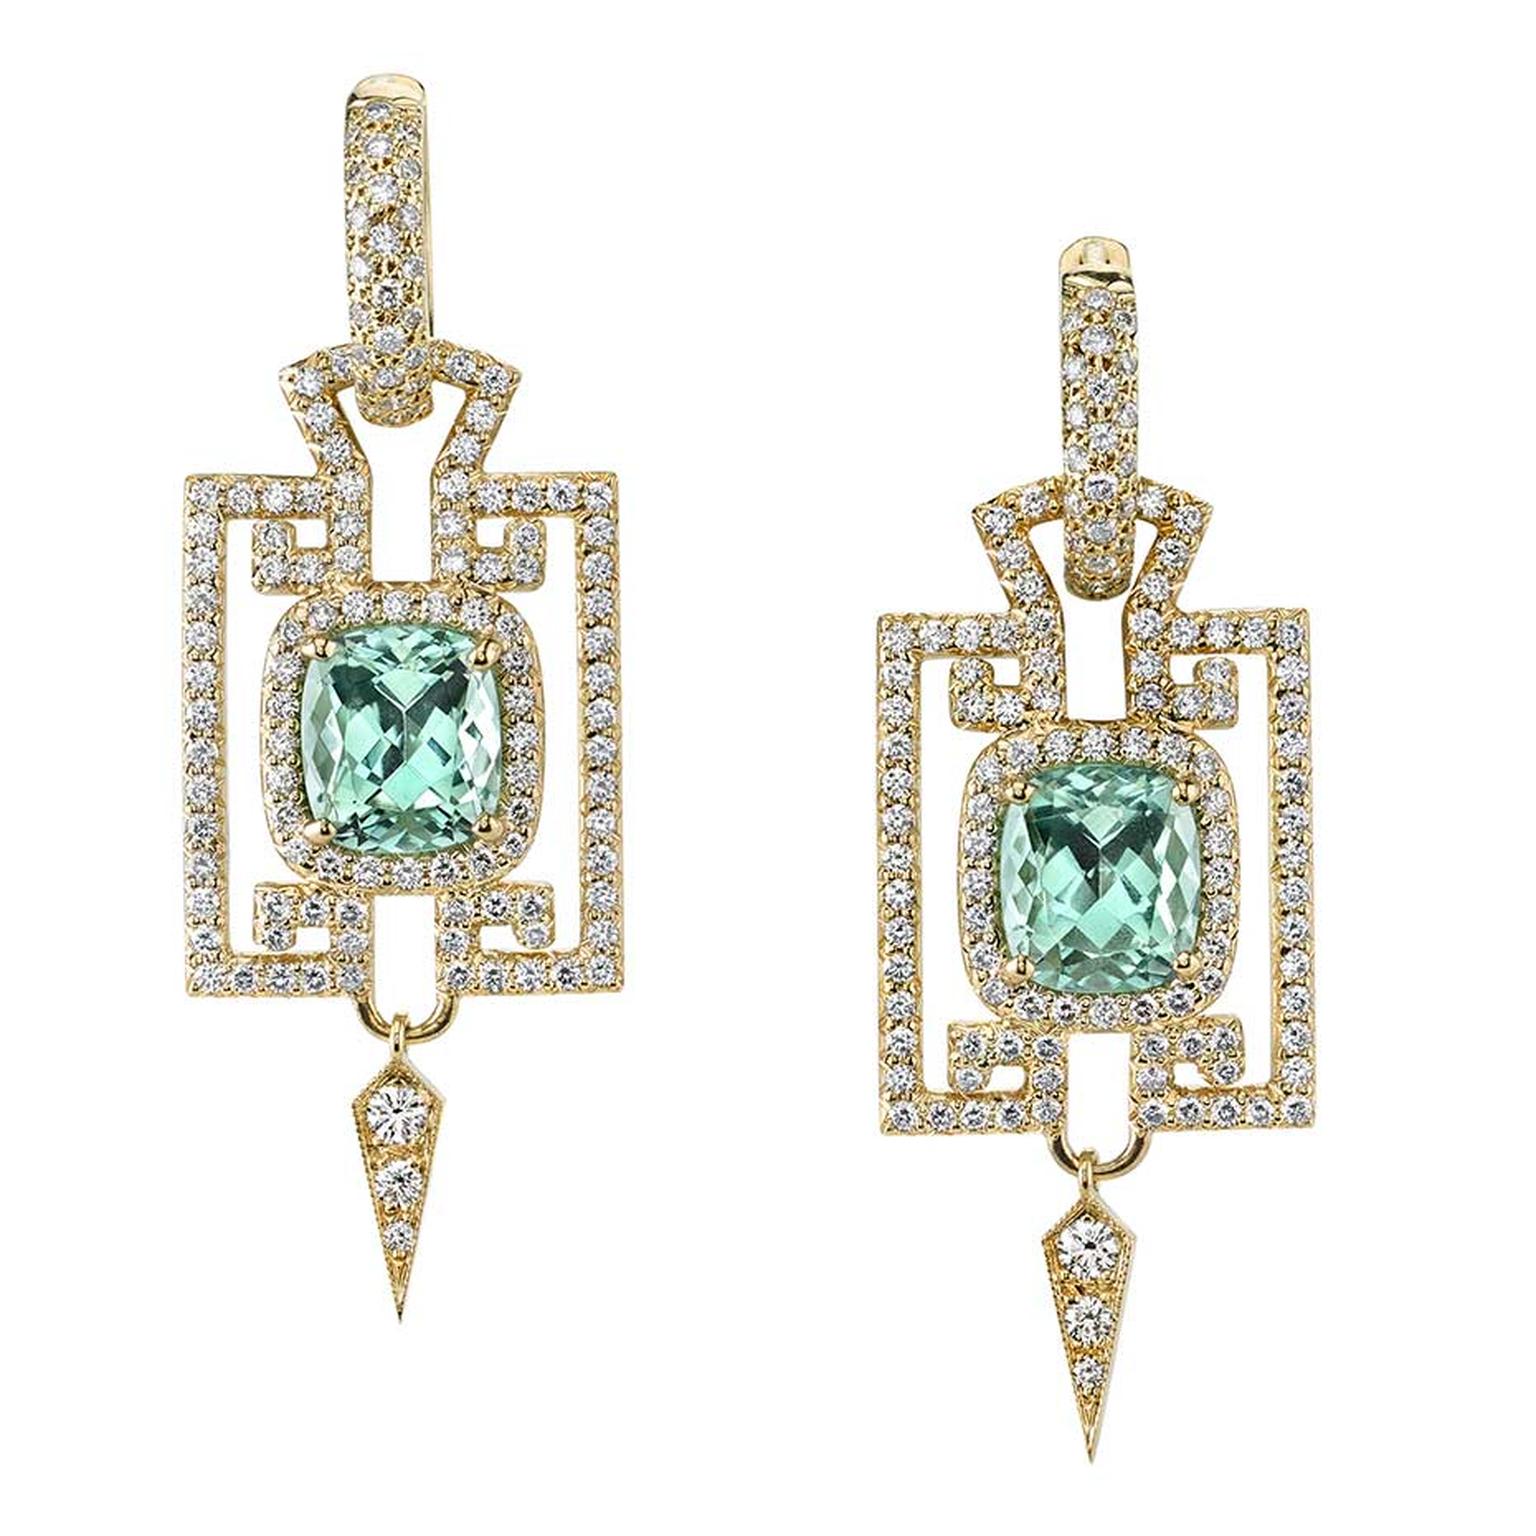 Erica Courtney square mint tourmaline earrings in gold with diamonds.